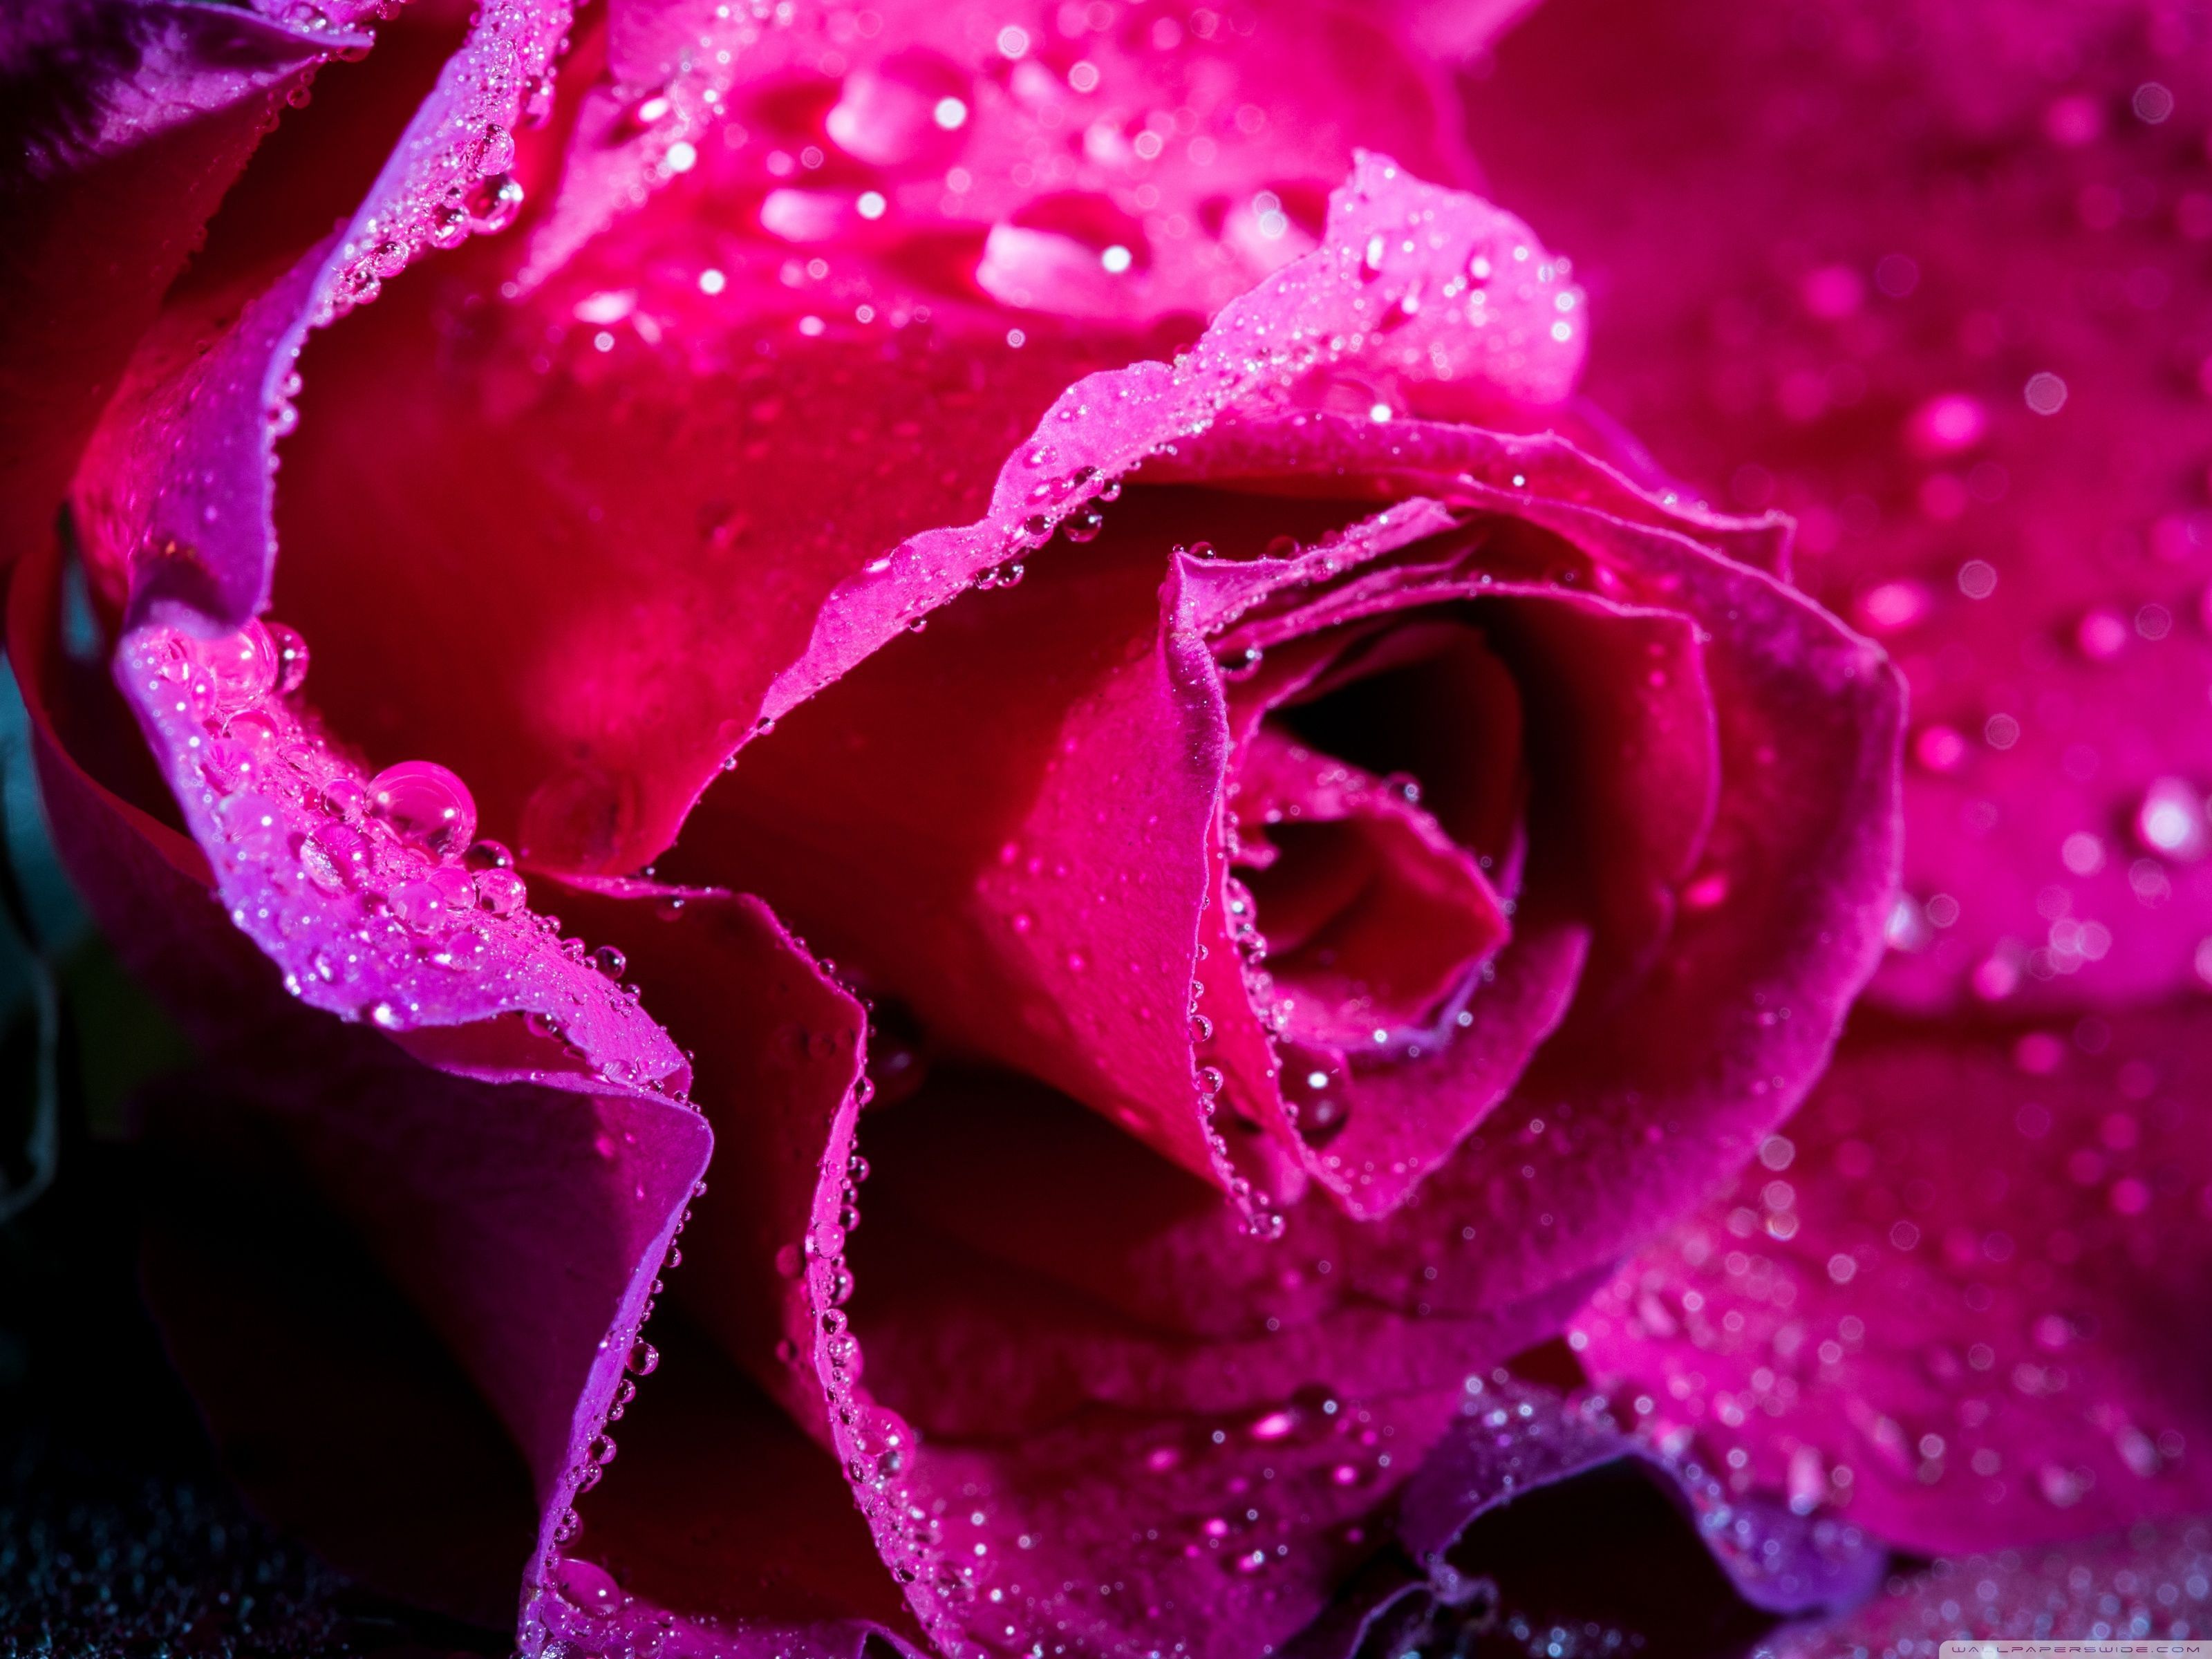 A close up of a pink rose with water droplets on it - Magenta